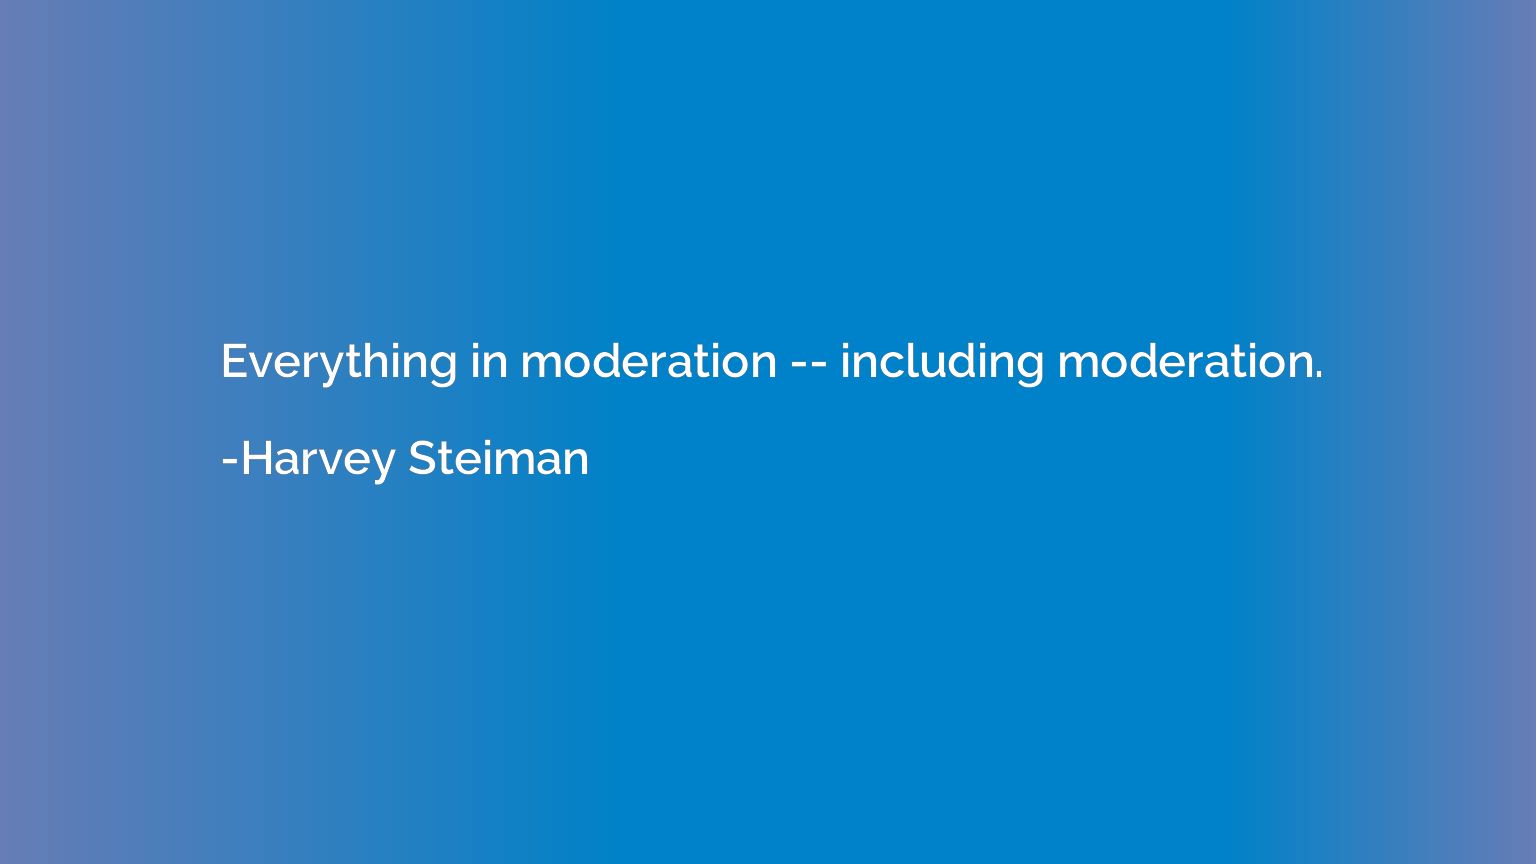 Everything in moderation -- including moderation.